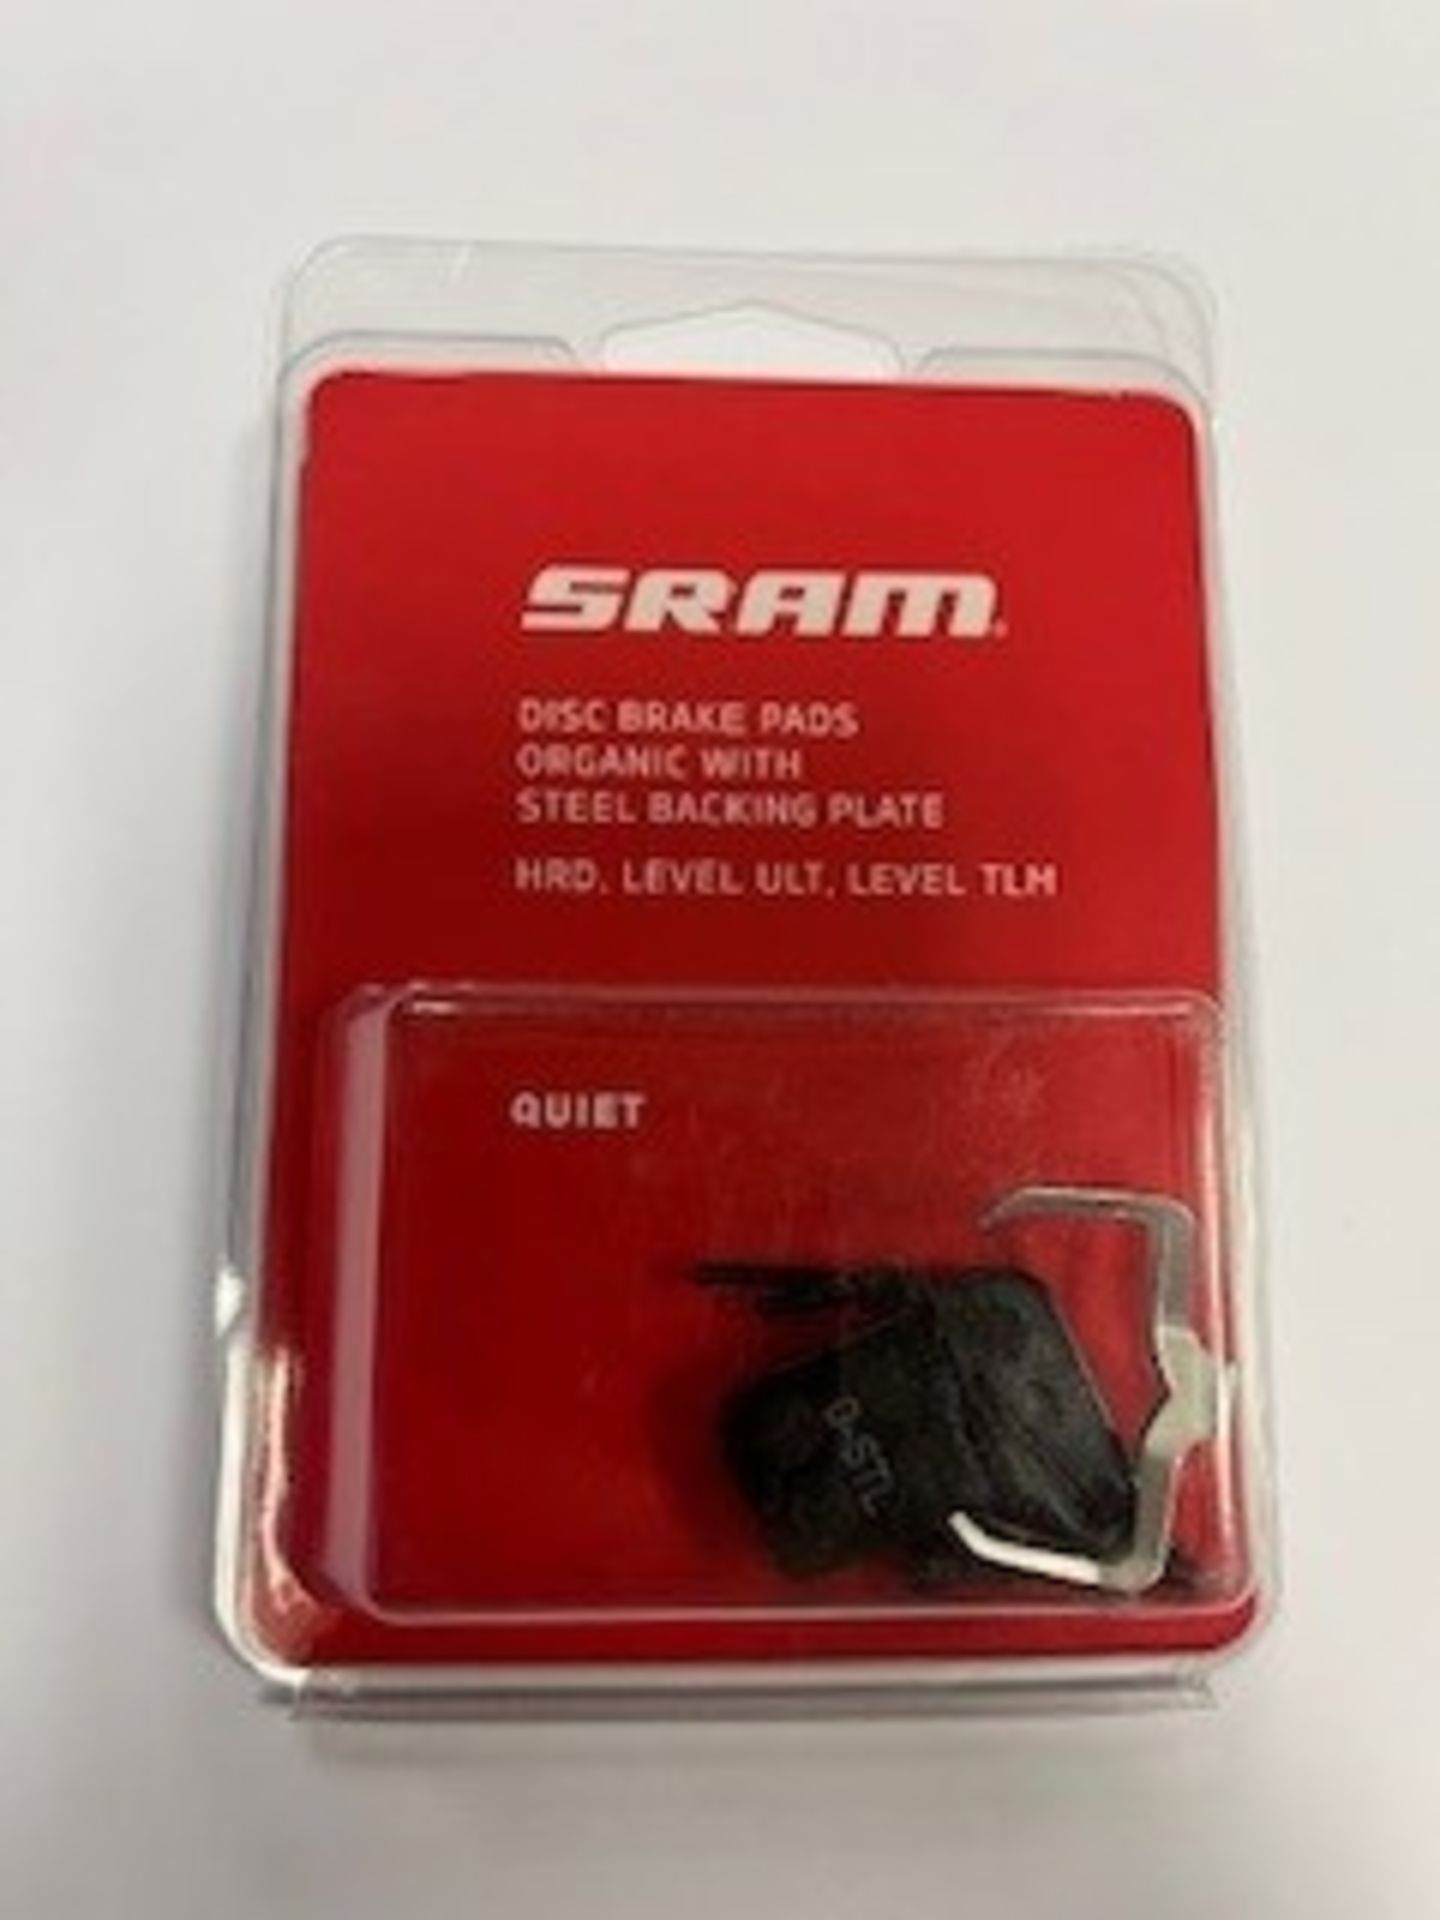 Sram Brake Pads to include 5x Disc Brake Pads Organic with Steel Backing Plate (HRD, LEVEL ULT, LEVE - Image 7 of 9